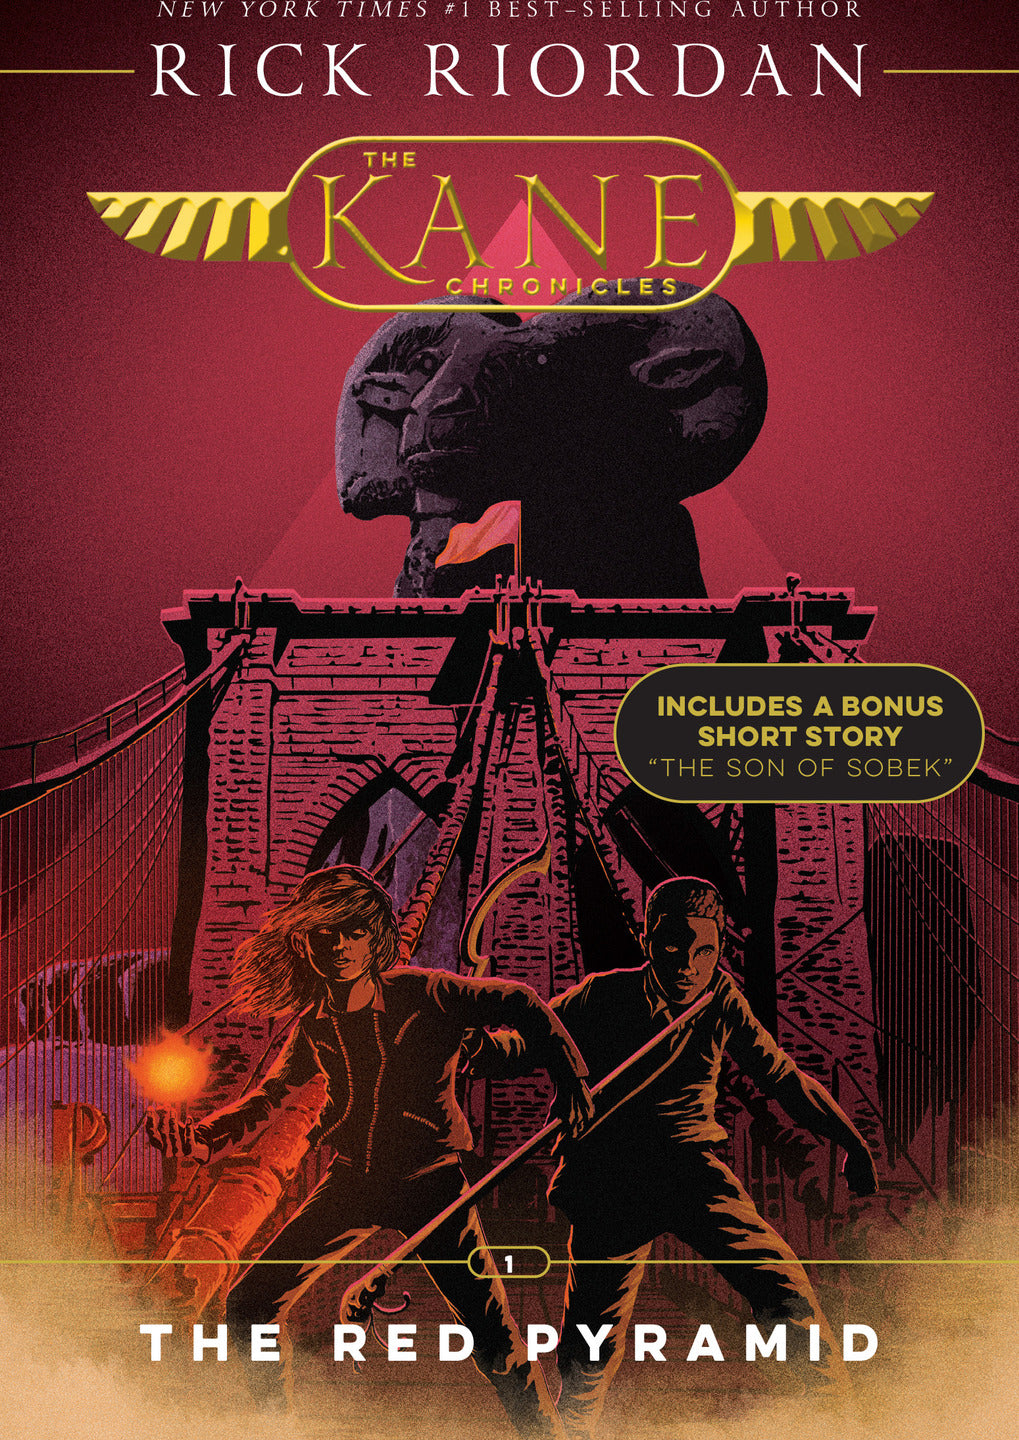 Kane Chronicles, The, Book One: Red Pyramid, The-The Kane Chronicles, Book One